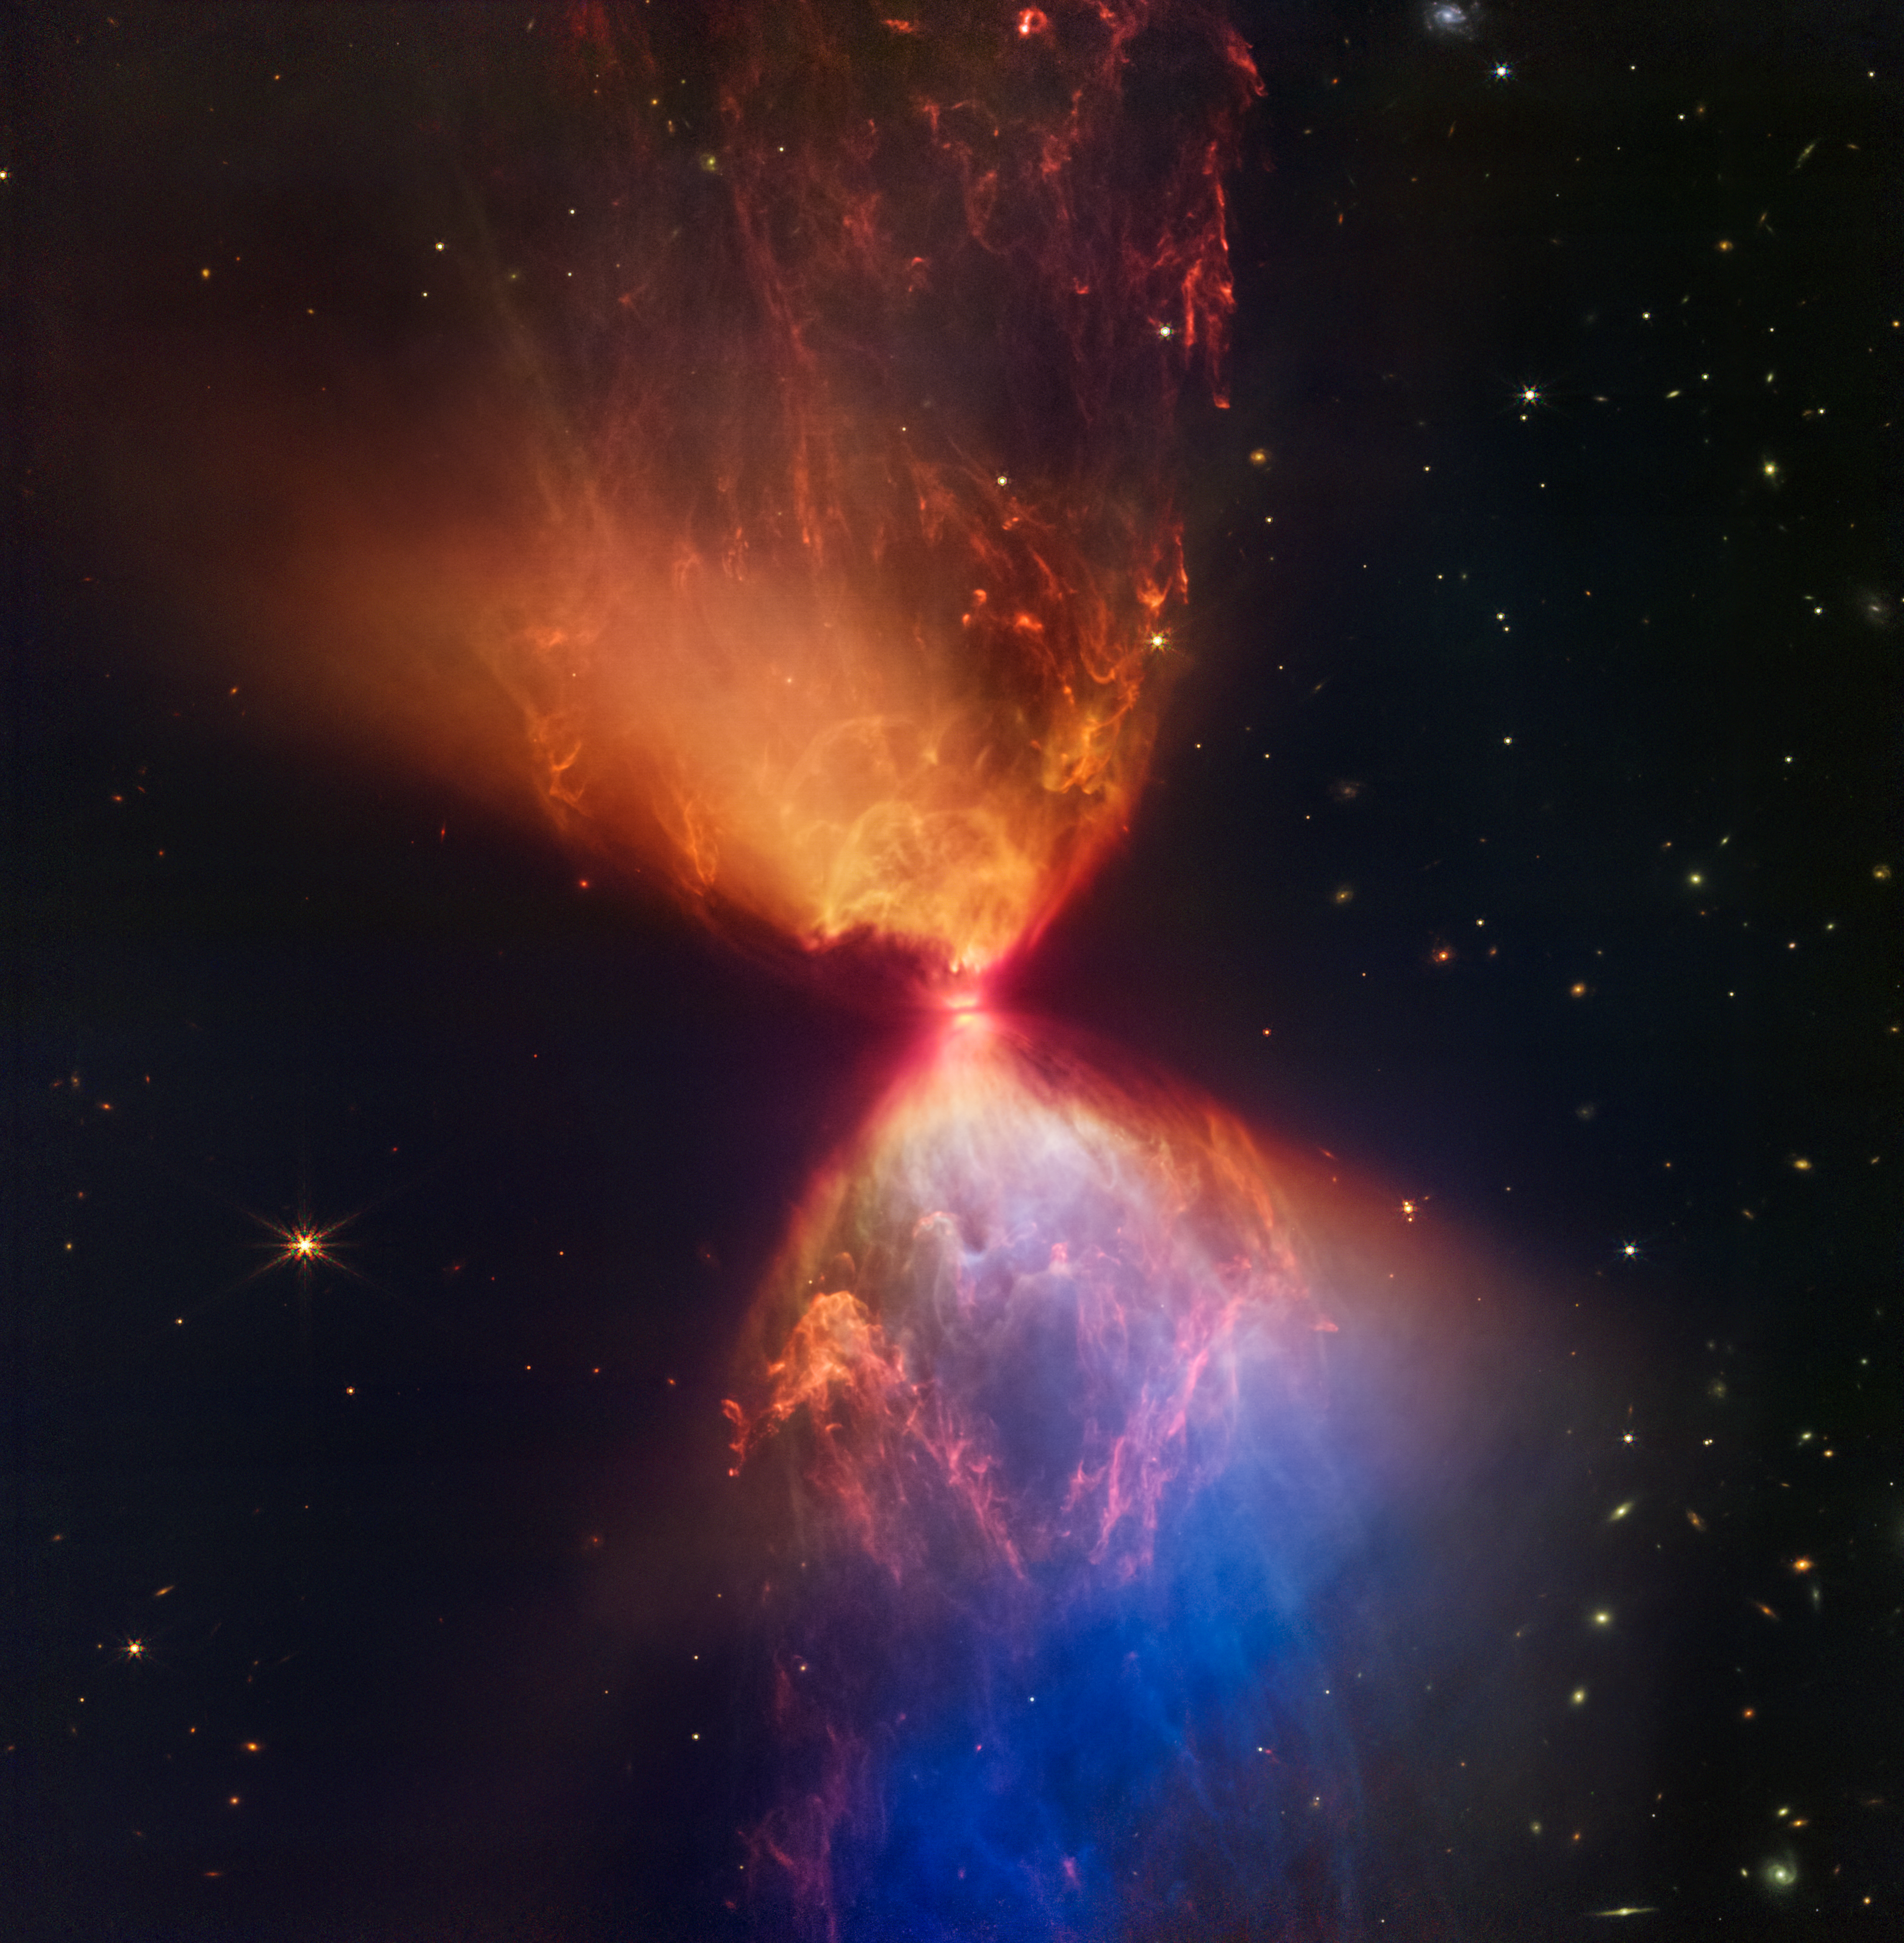 The protostar within the dark cloud L1527, shown in this image from NASA’s James Webb Space Telescope Near-Infrared Camera (NIRCam), is embedded within a cloud of material feeding its growth. Ejections from the star have cleared out cavities above and below it, whose boundaries glow orange and blue in this infrared view. The upper central region displays bubble-like shapes due to stellar “burps,” or sporadic ejections. Webb also detects filaments made of molecular hydrogen that has been shocked by past stellar ejections. The edges of the cavities at upper left and lower right appear straight, while the boundaries at upper right and lower left are curved. The region at lower right appears blue, as there’s less dust between it and Webb than the orange regions above it. Image: NASA, ESA, CSA, STScI / Joseph DePasquale (STScI), Alyssa Pagan (STScI), Anton M. Koekemoer (STScI)